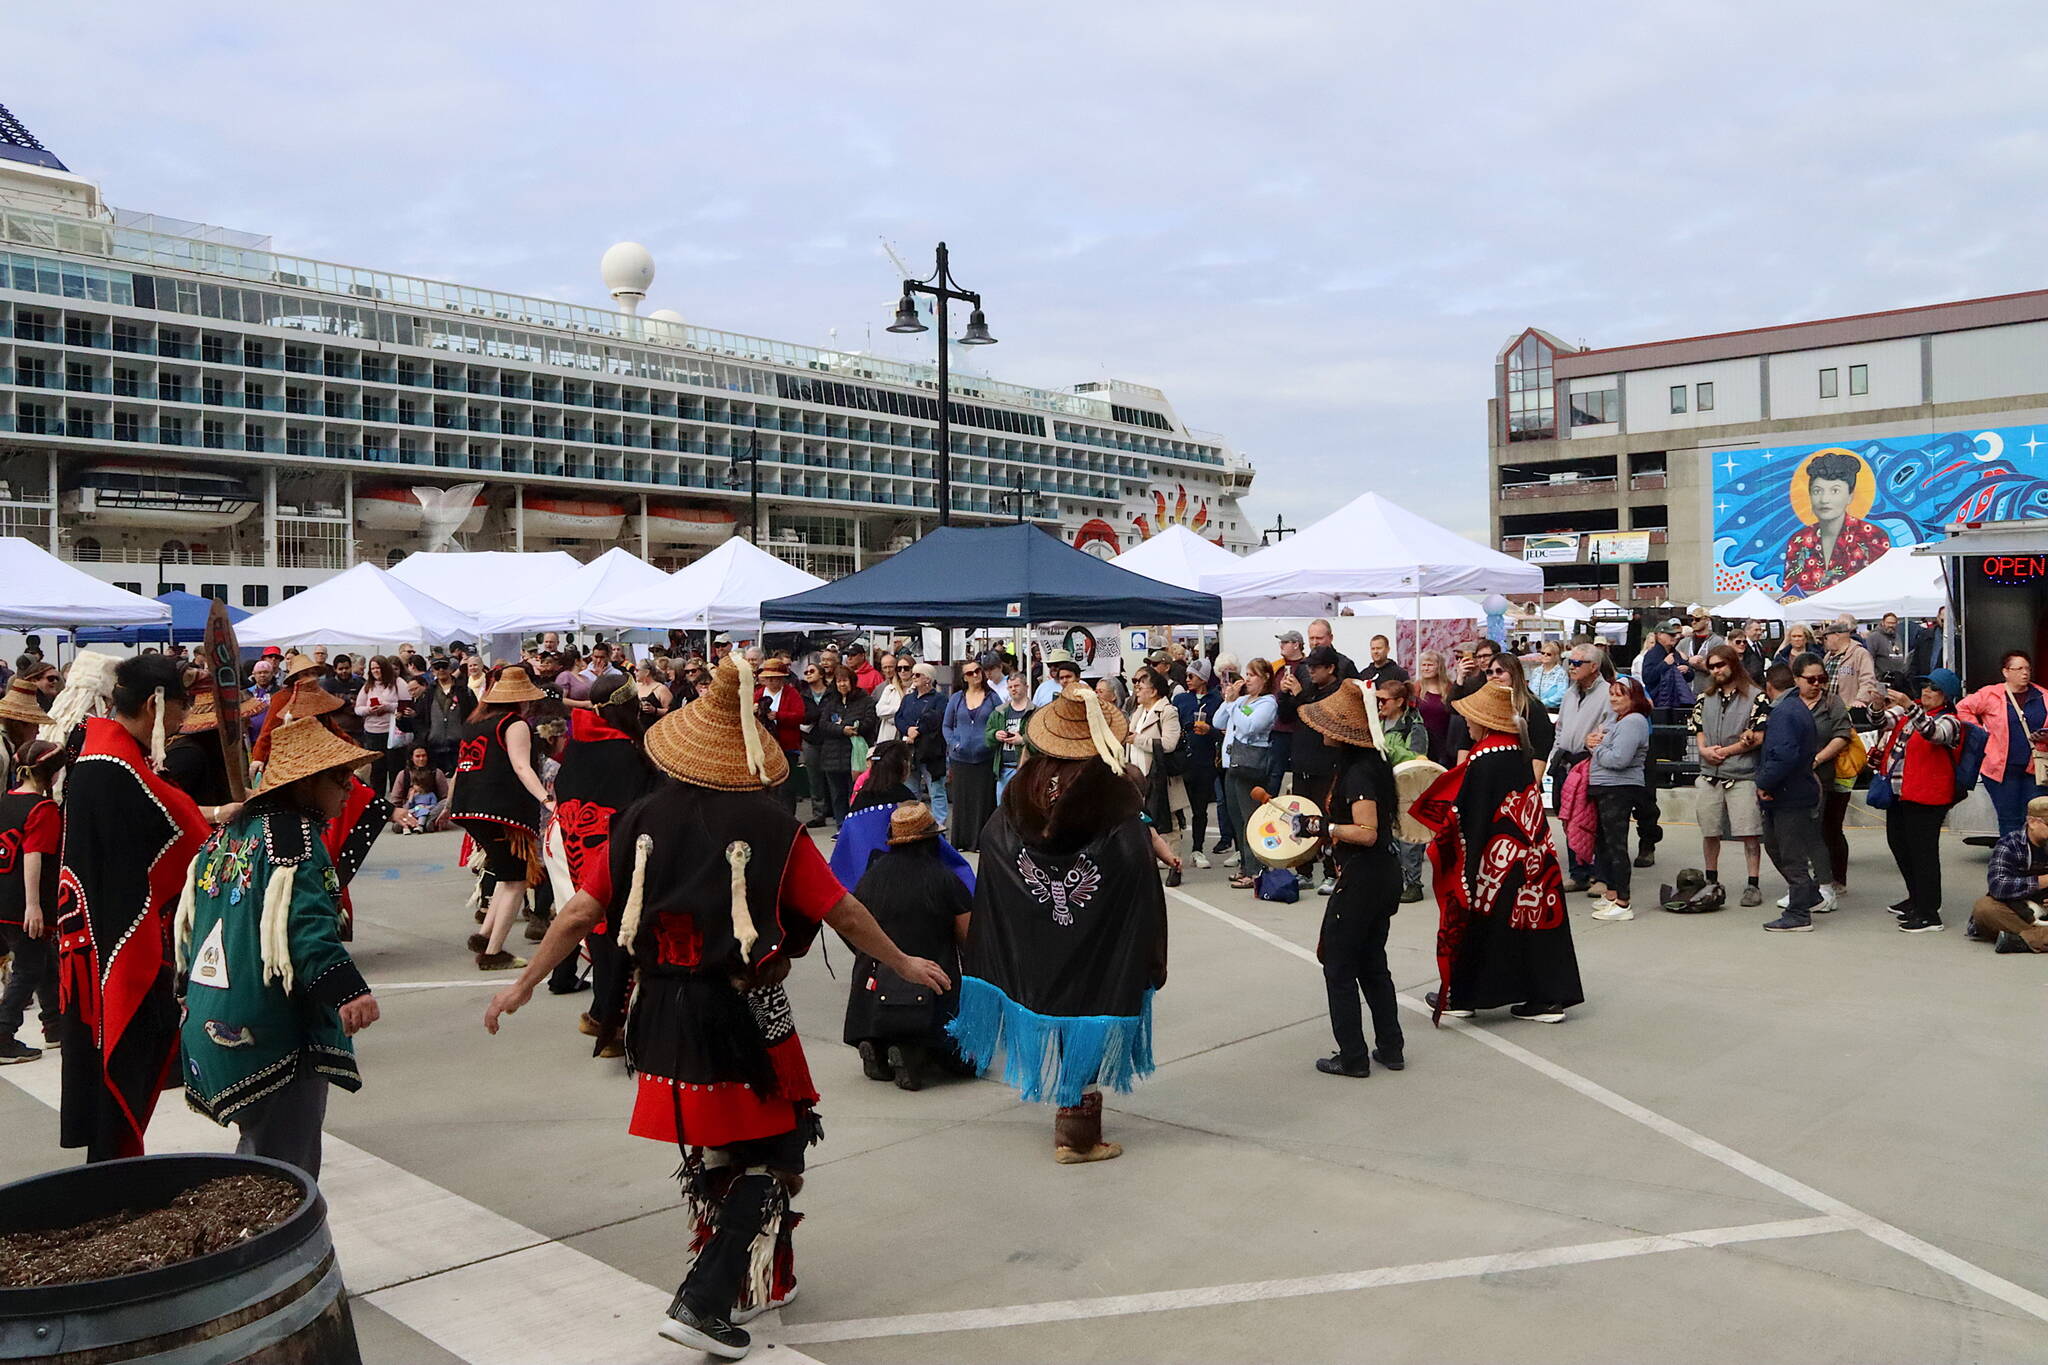 Alaska Native dancers perform during the Maritime Festival on May 4 at Elizabeth Peratrovich Plaza, located in an area between the Marine Parking Garage and Taku Dock formerly known as the Archipelago Property. Among the projects proposed using Marine Passenger Fees is an Archipelago Museum in the undeveloped space that was originally proposed several years ago. (Mark Sabbatini / Juneau Empire)